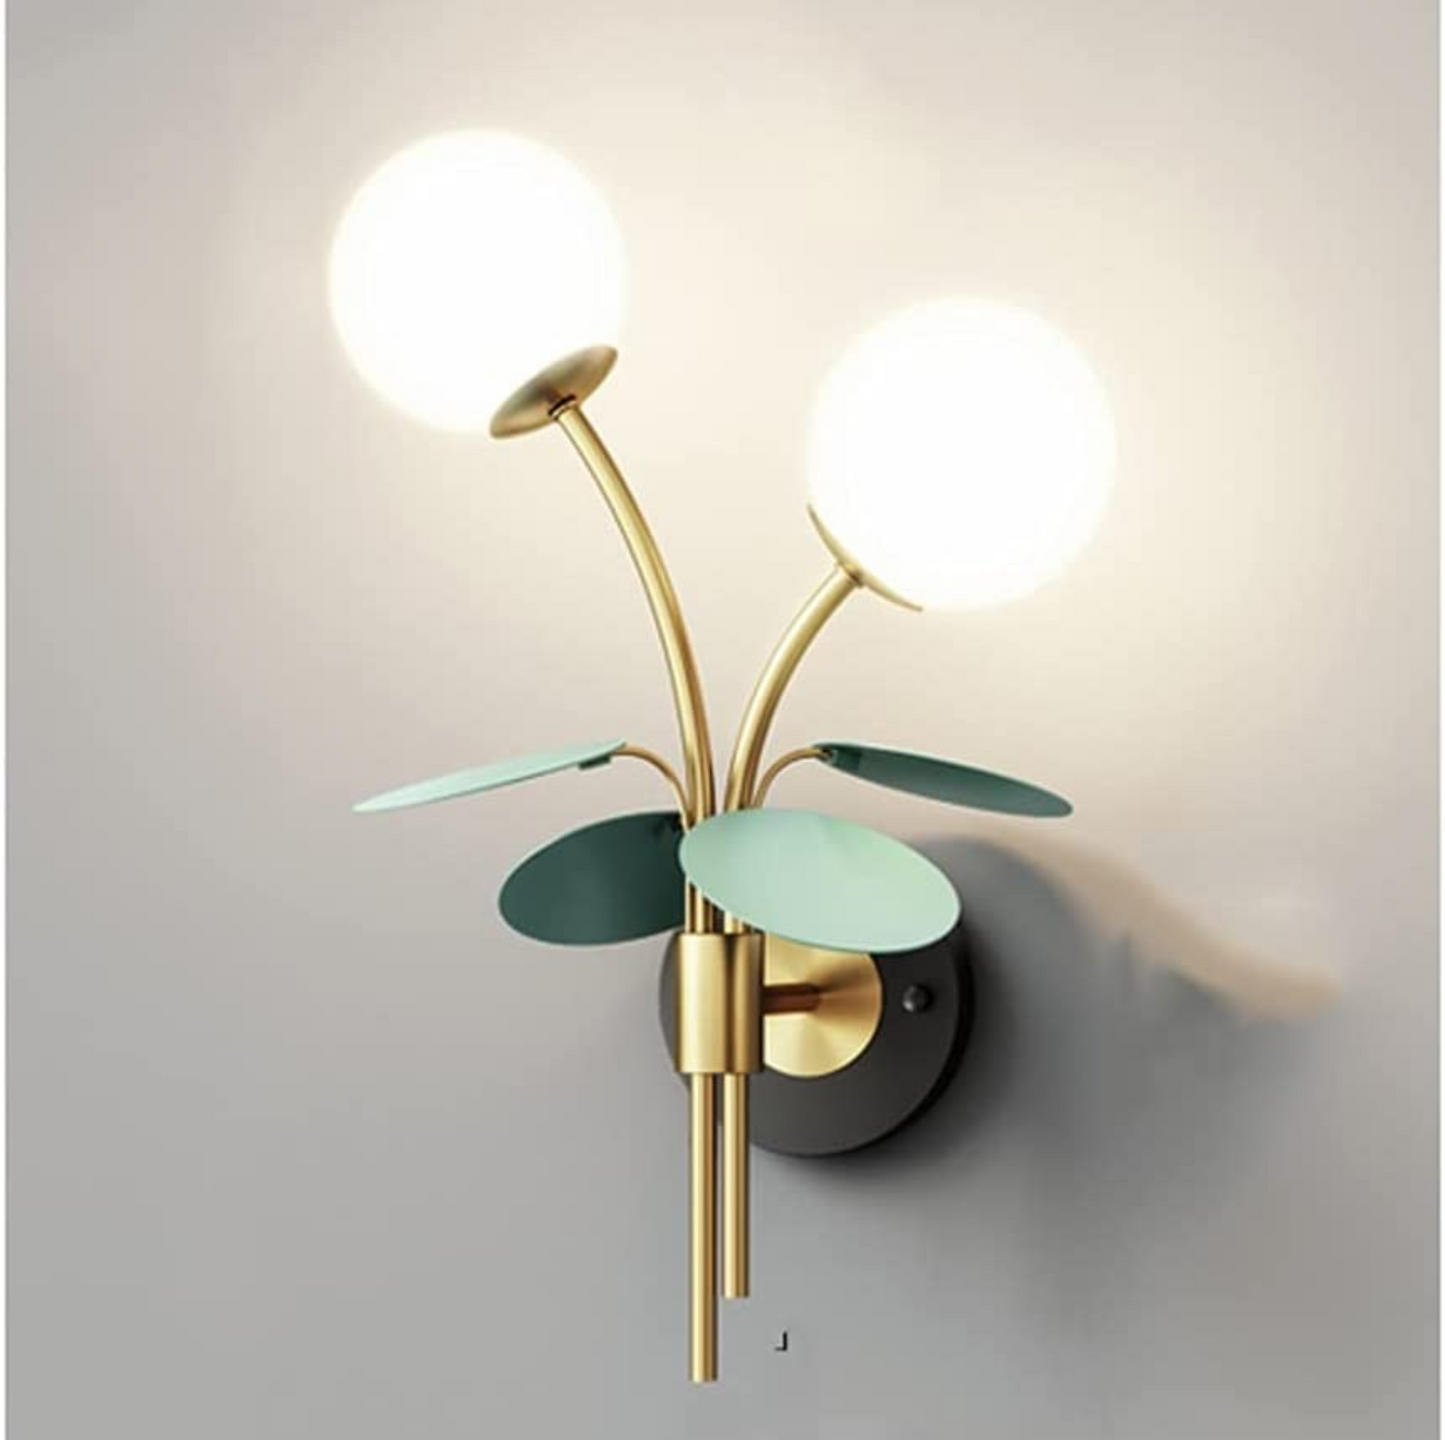 Load image into Gallery viewer, Modern Metal Iron Wall Lamp by Gloss (B818)
